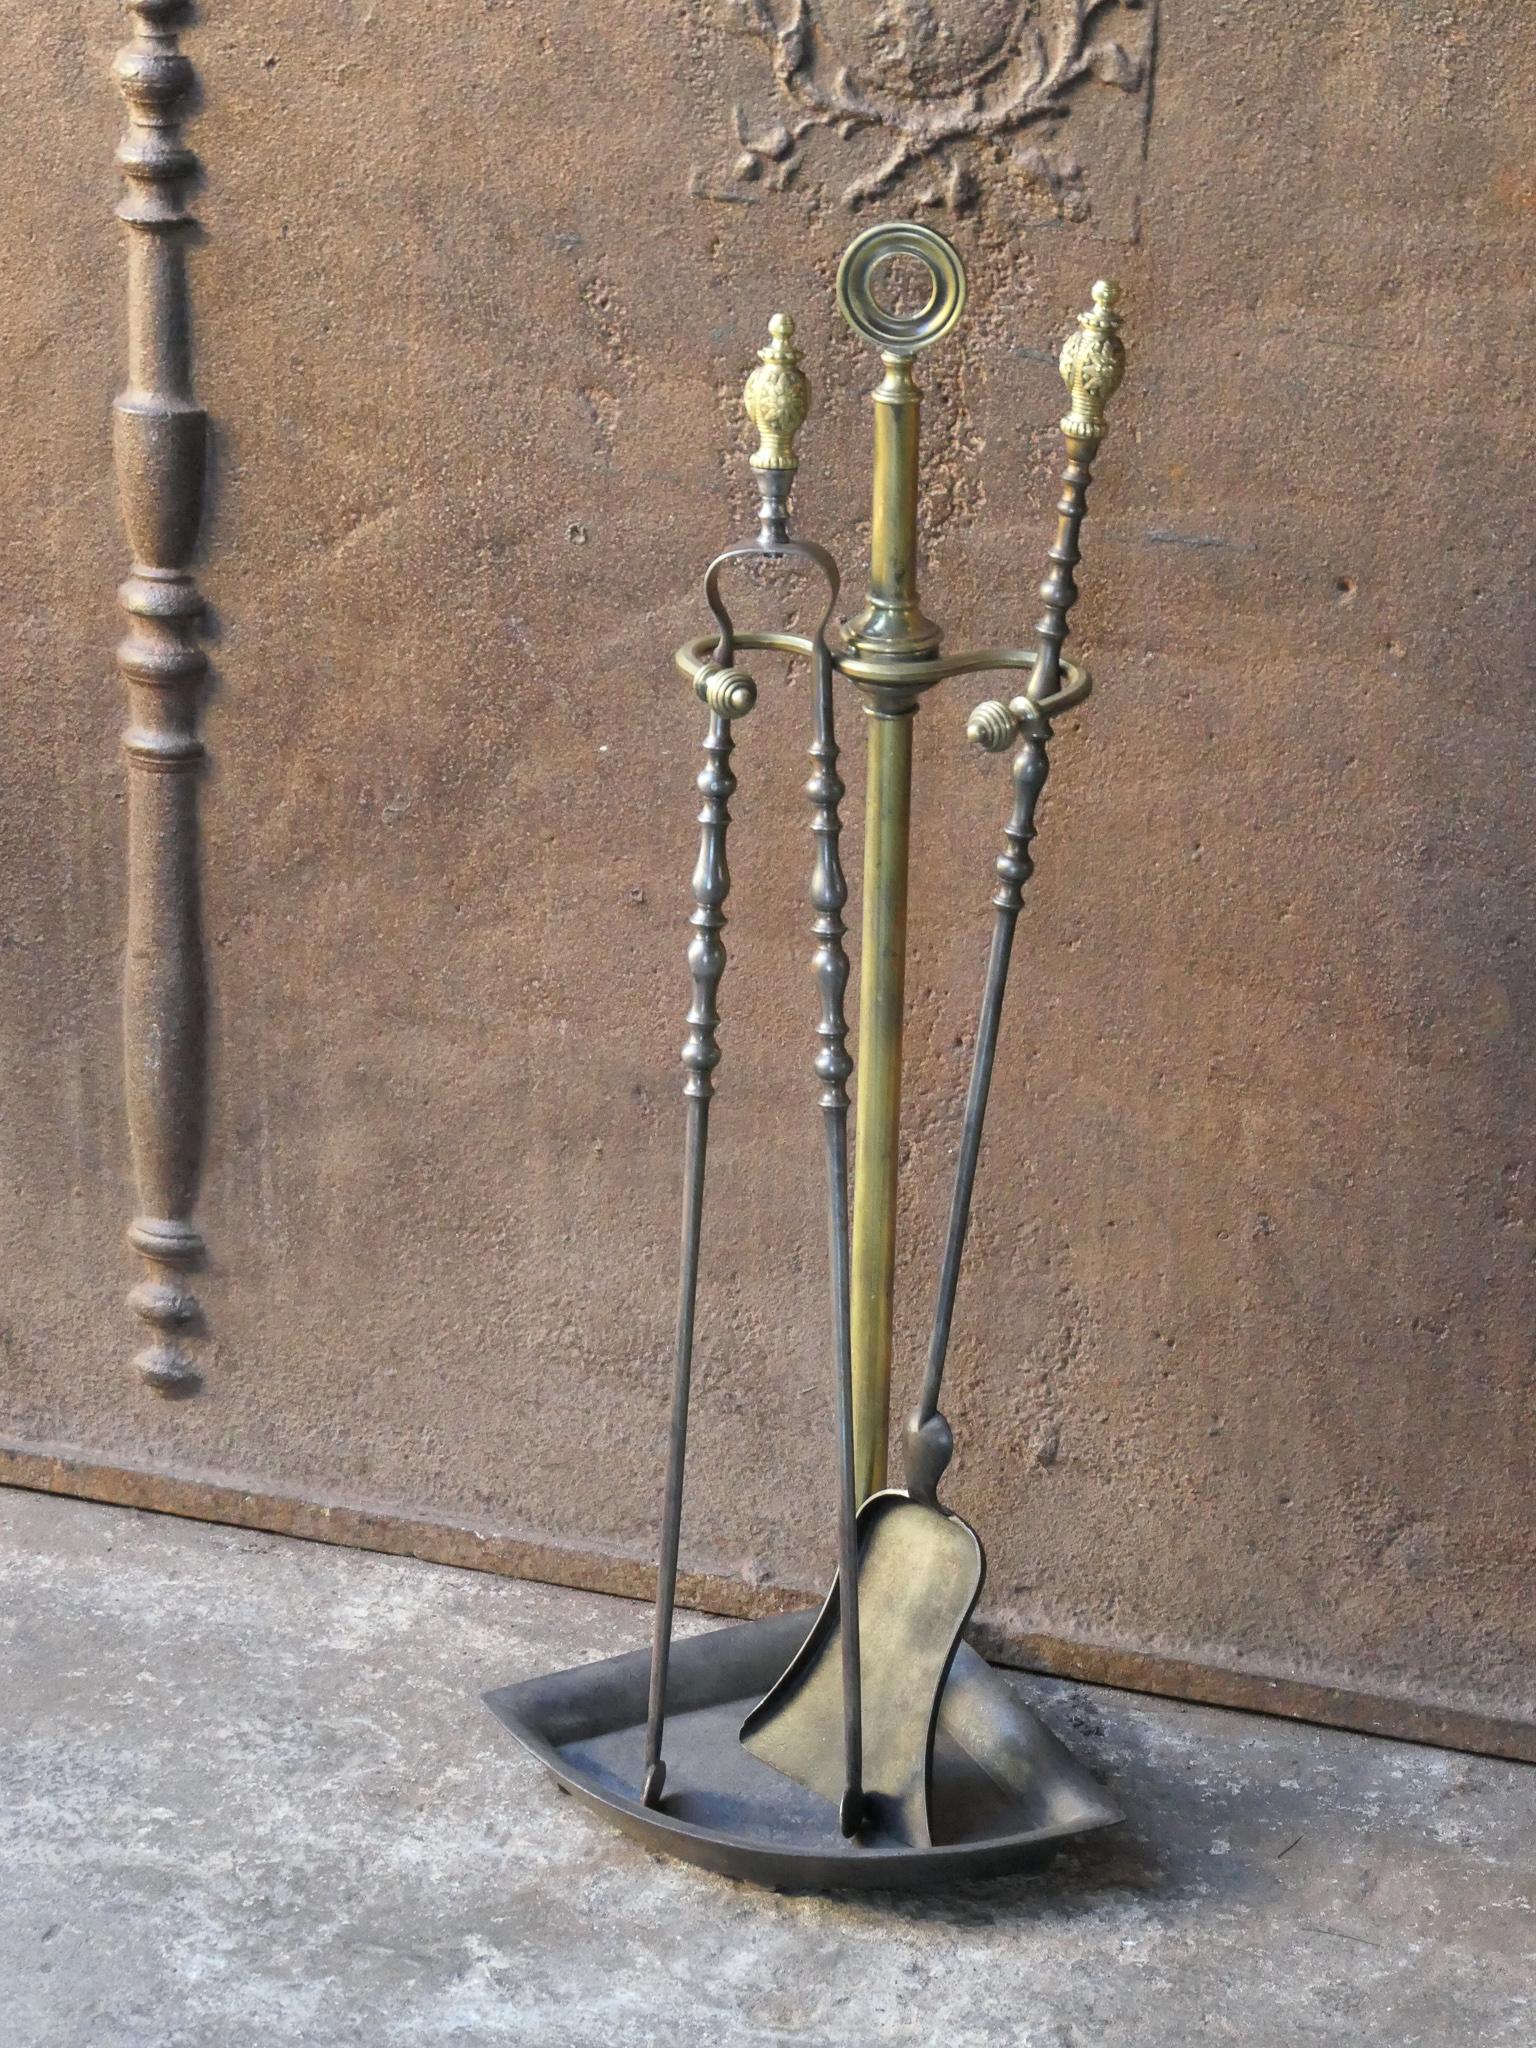 19th Century French Napoleon III companion set. The tool set consists of thongs, shovel and stand. Made of wrought iron and brass. It is in a good condition and is fully functional.